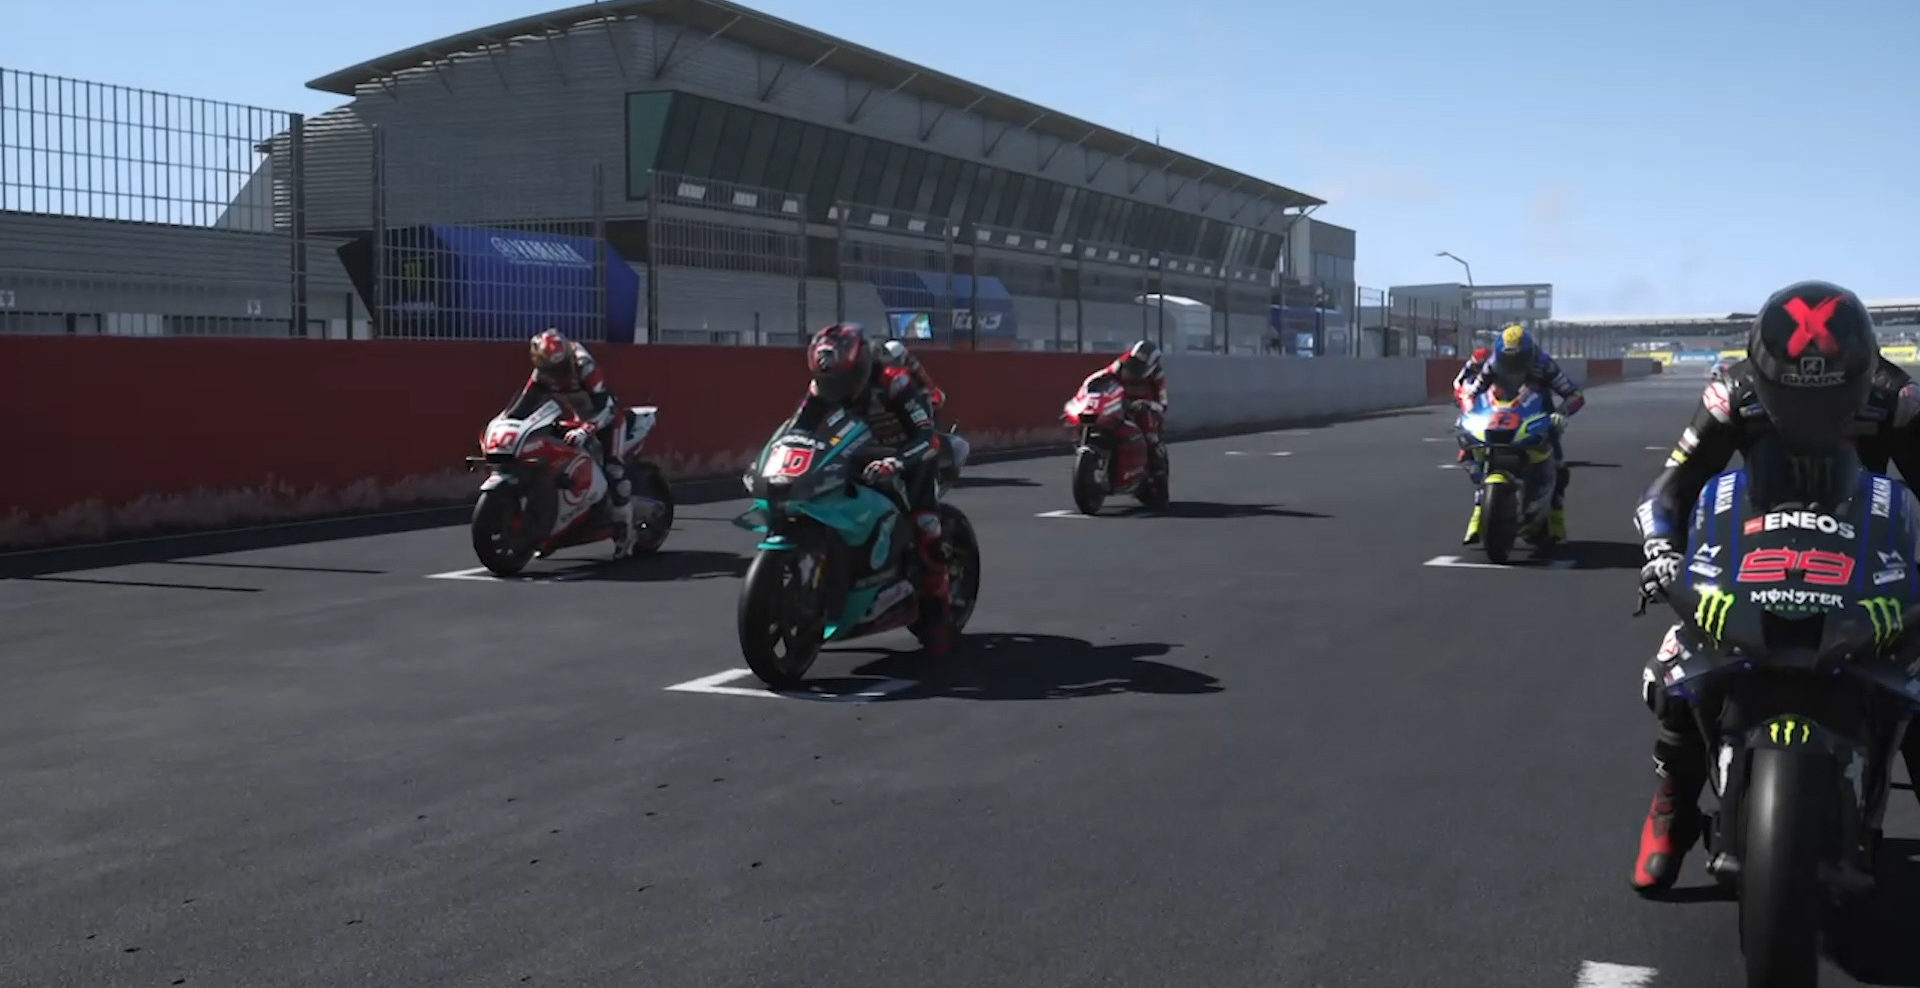 The starting grid for MotoGP virtual race five, at Silverstone Circuit. Image courtesy Dorna.